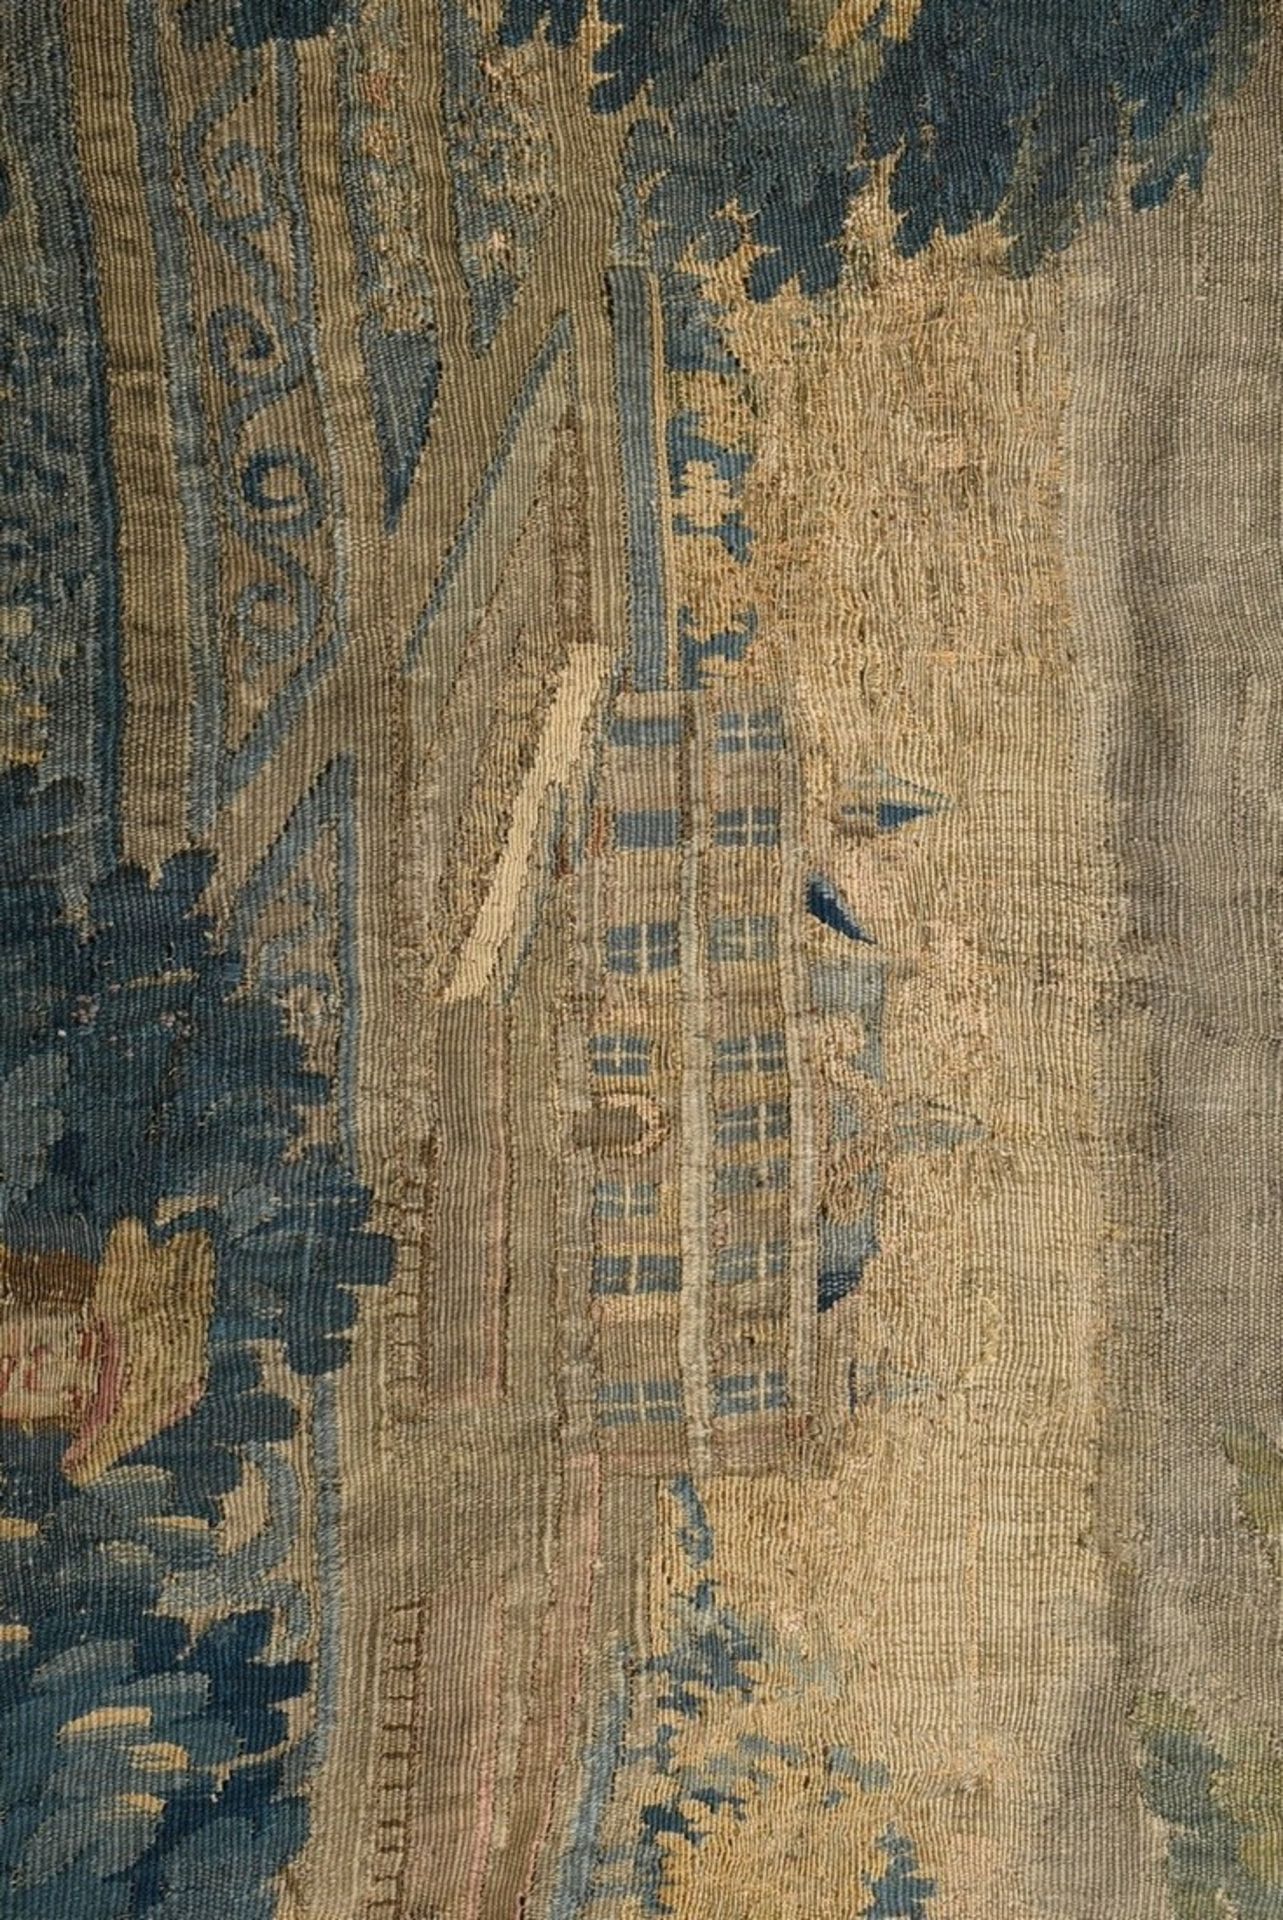 Antique tapestry "Paille Maille playing persons in front of castle architecture", wool/cotton, nort - Image 6 of 11